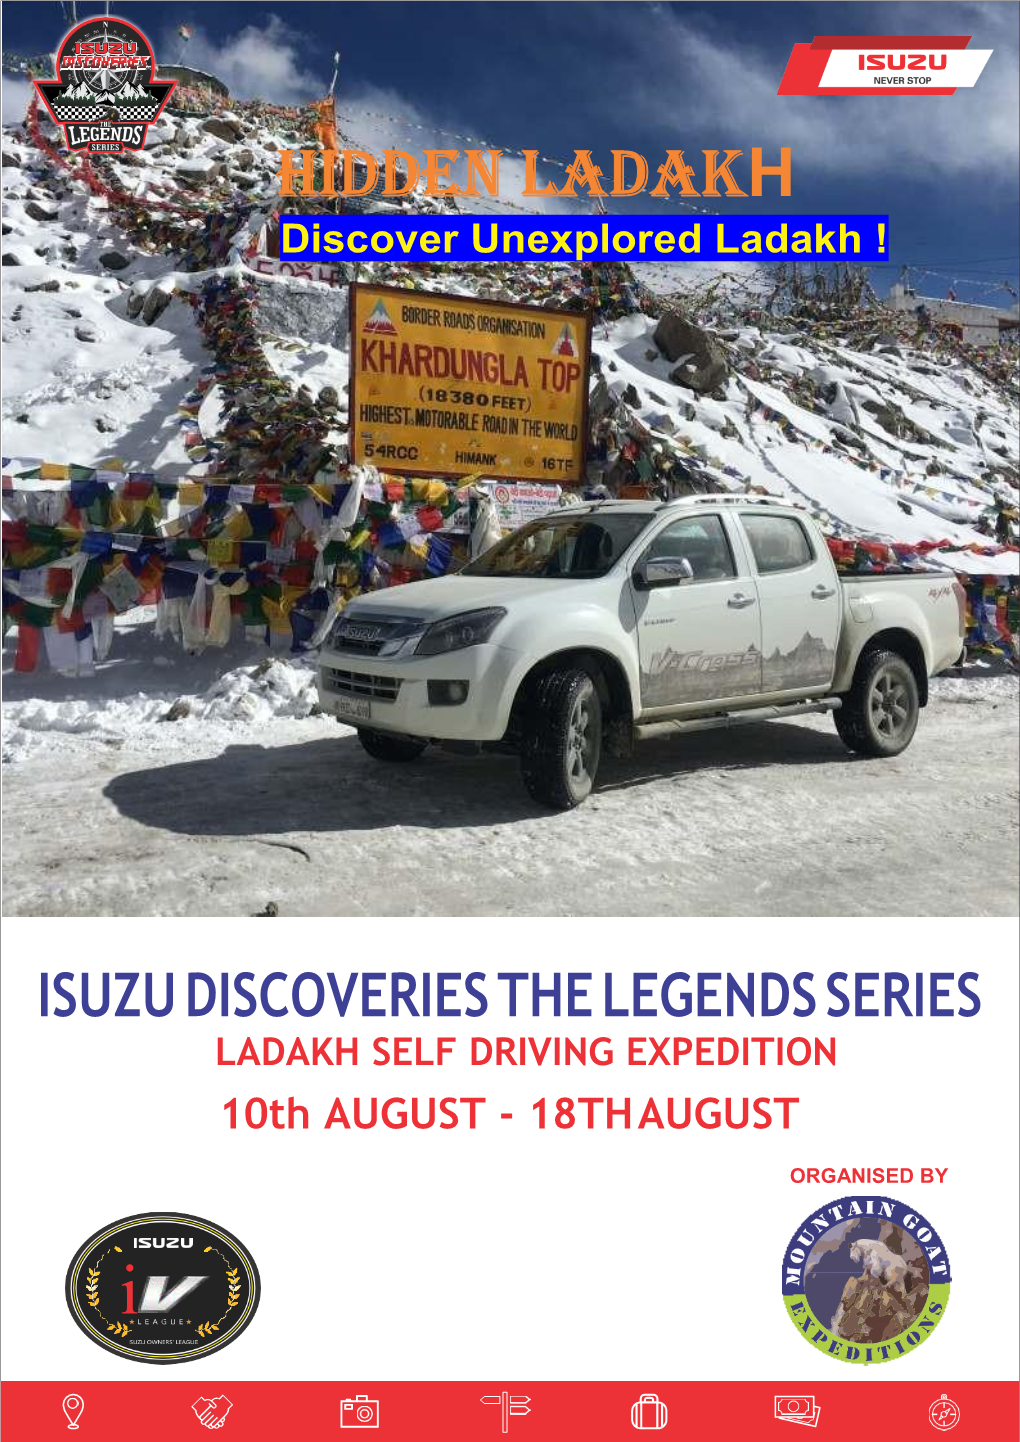 ISUZU DISCOVERIES the LEGENDS SERIES LADAKH SELF DRIVING EXPEDITION 10Th AUGUST - 18TH AUGUST